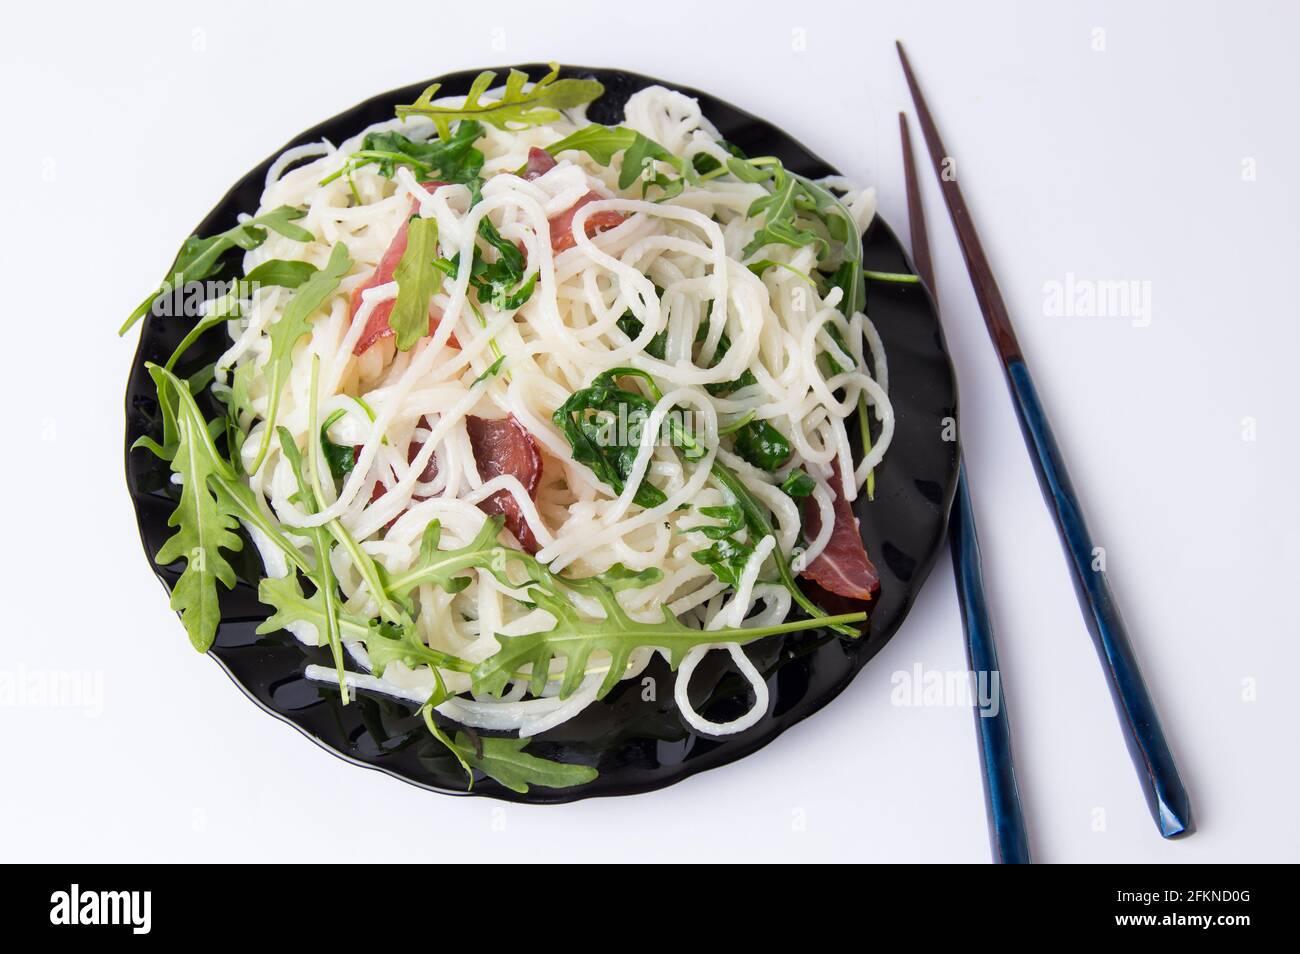 Pasta with prosciutto and arugula vegetable served on a plate Stock Photo